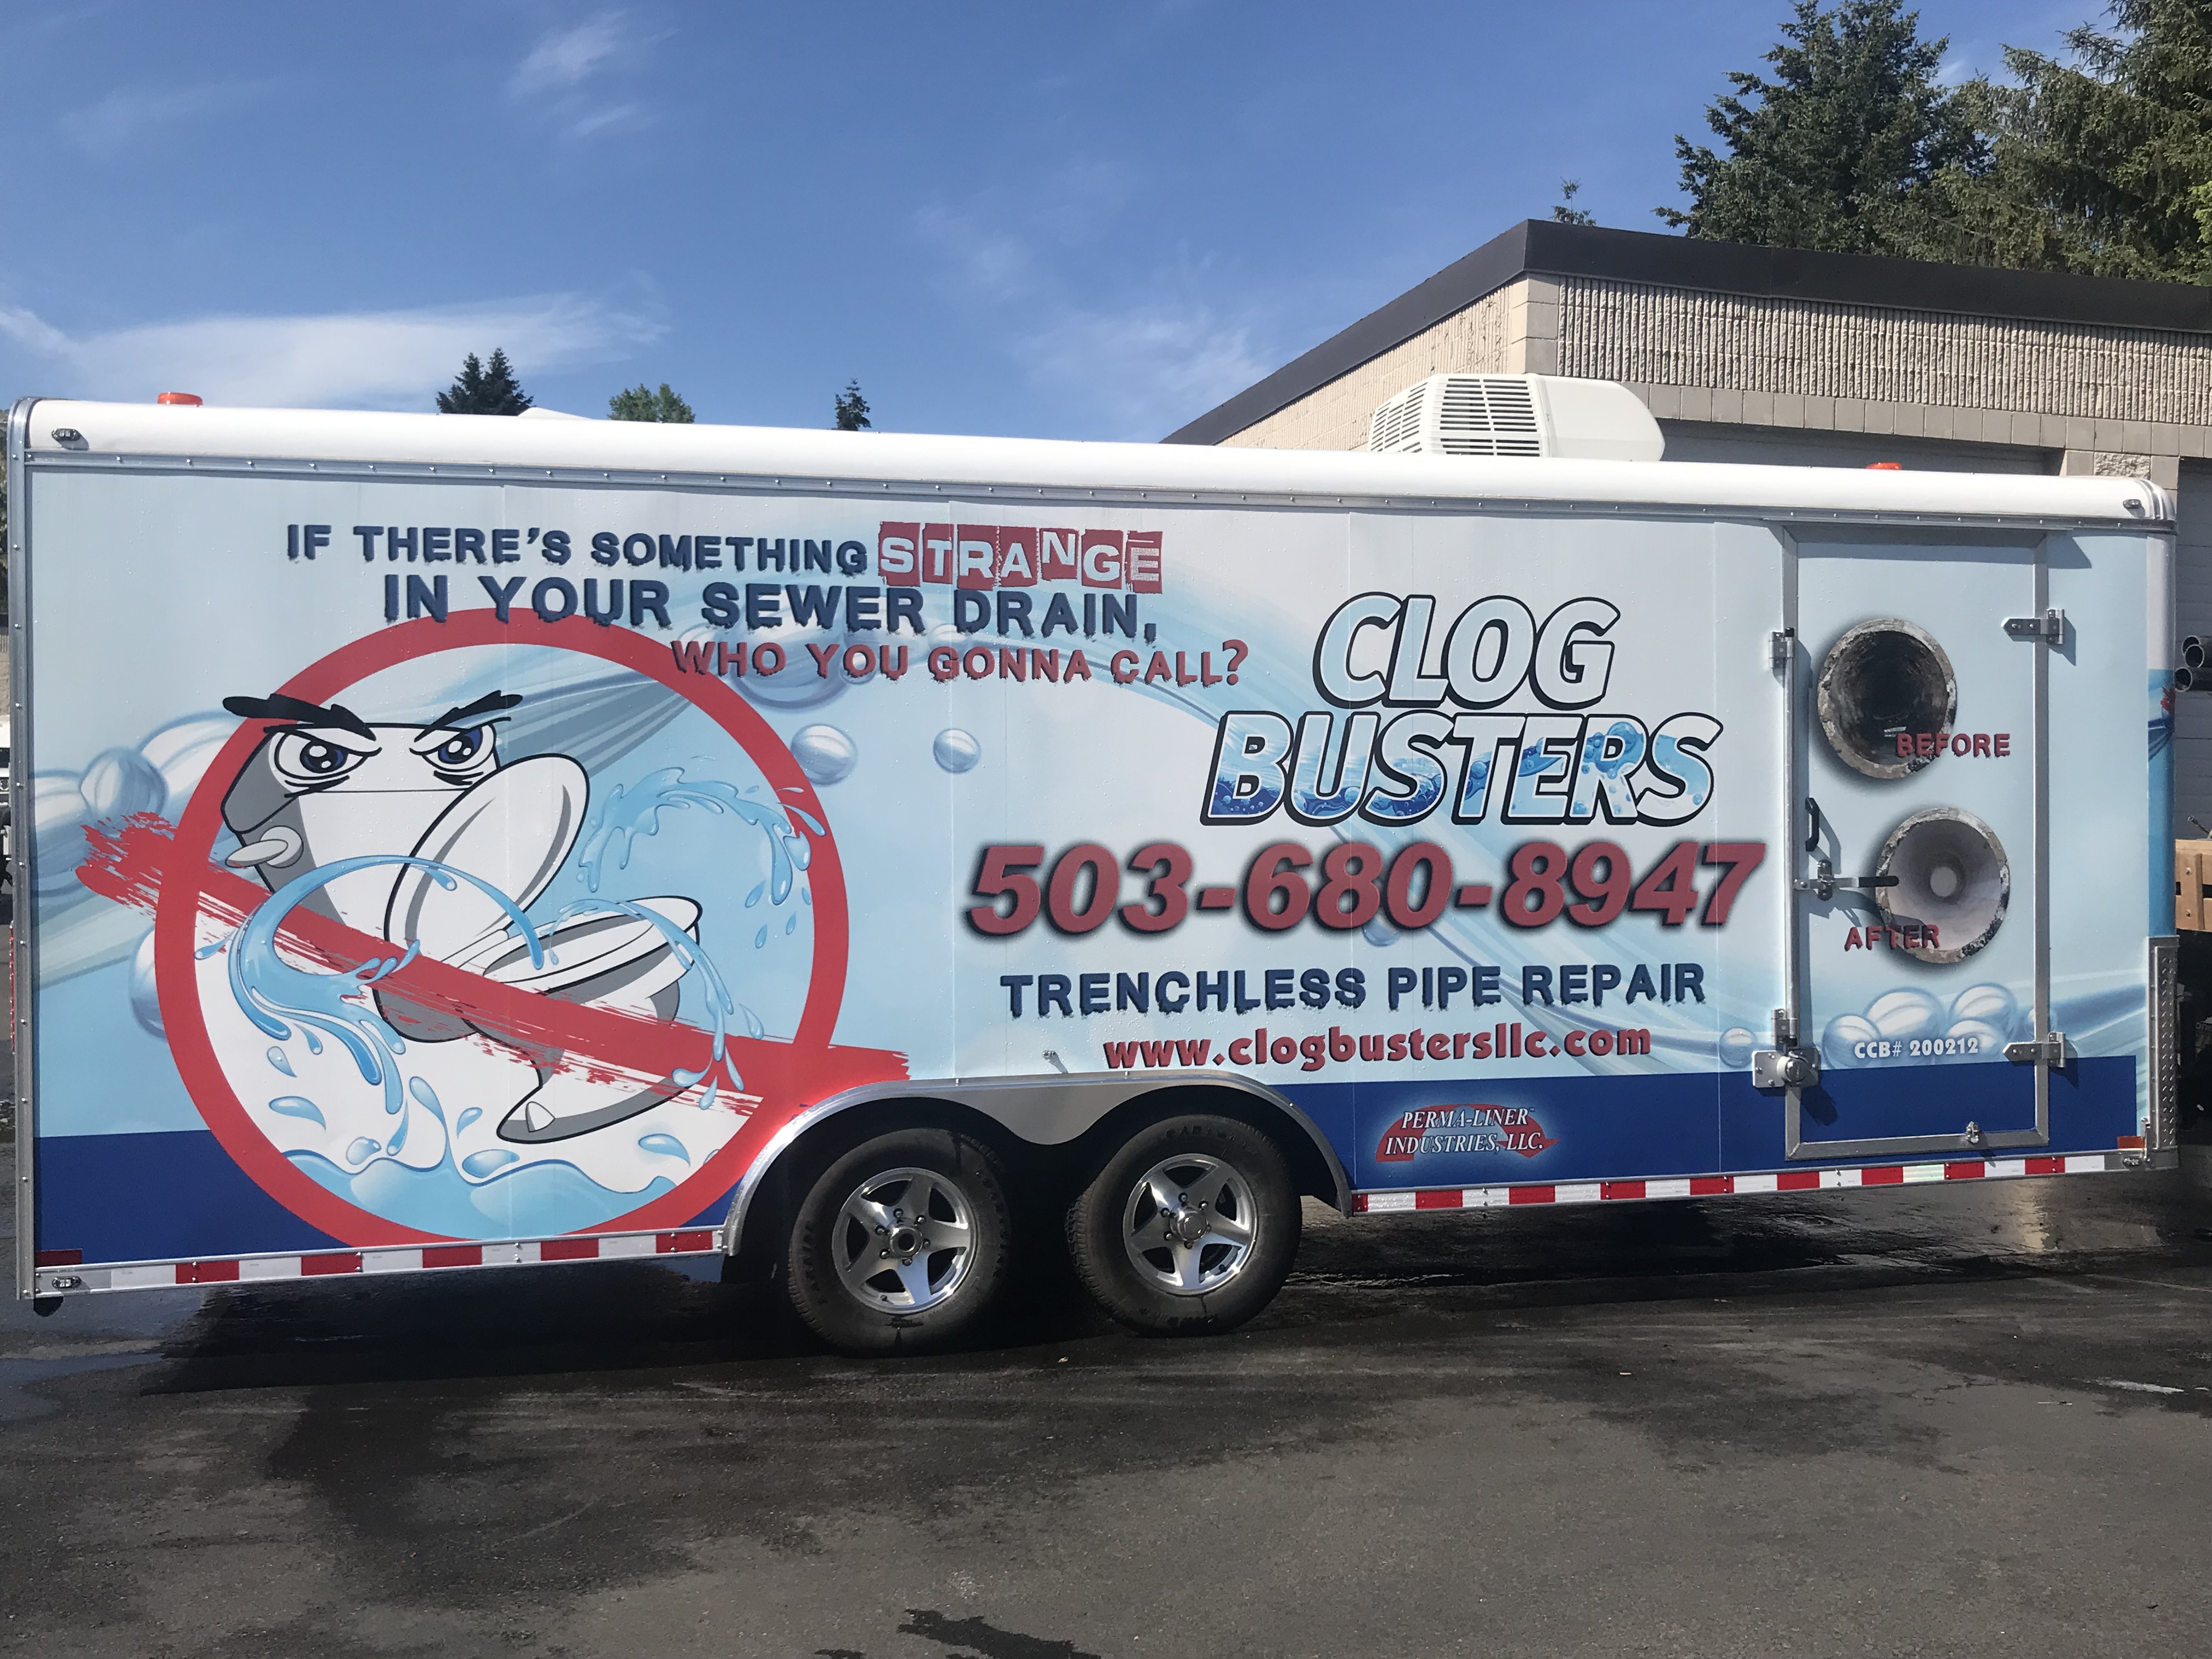 Pro Truck for Clog Busters in Hillsboro